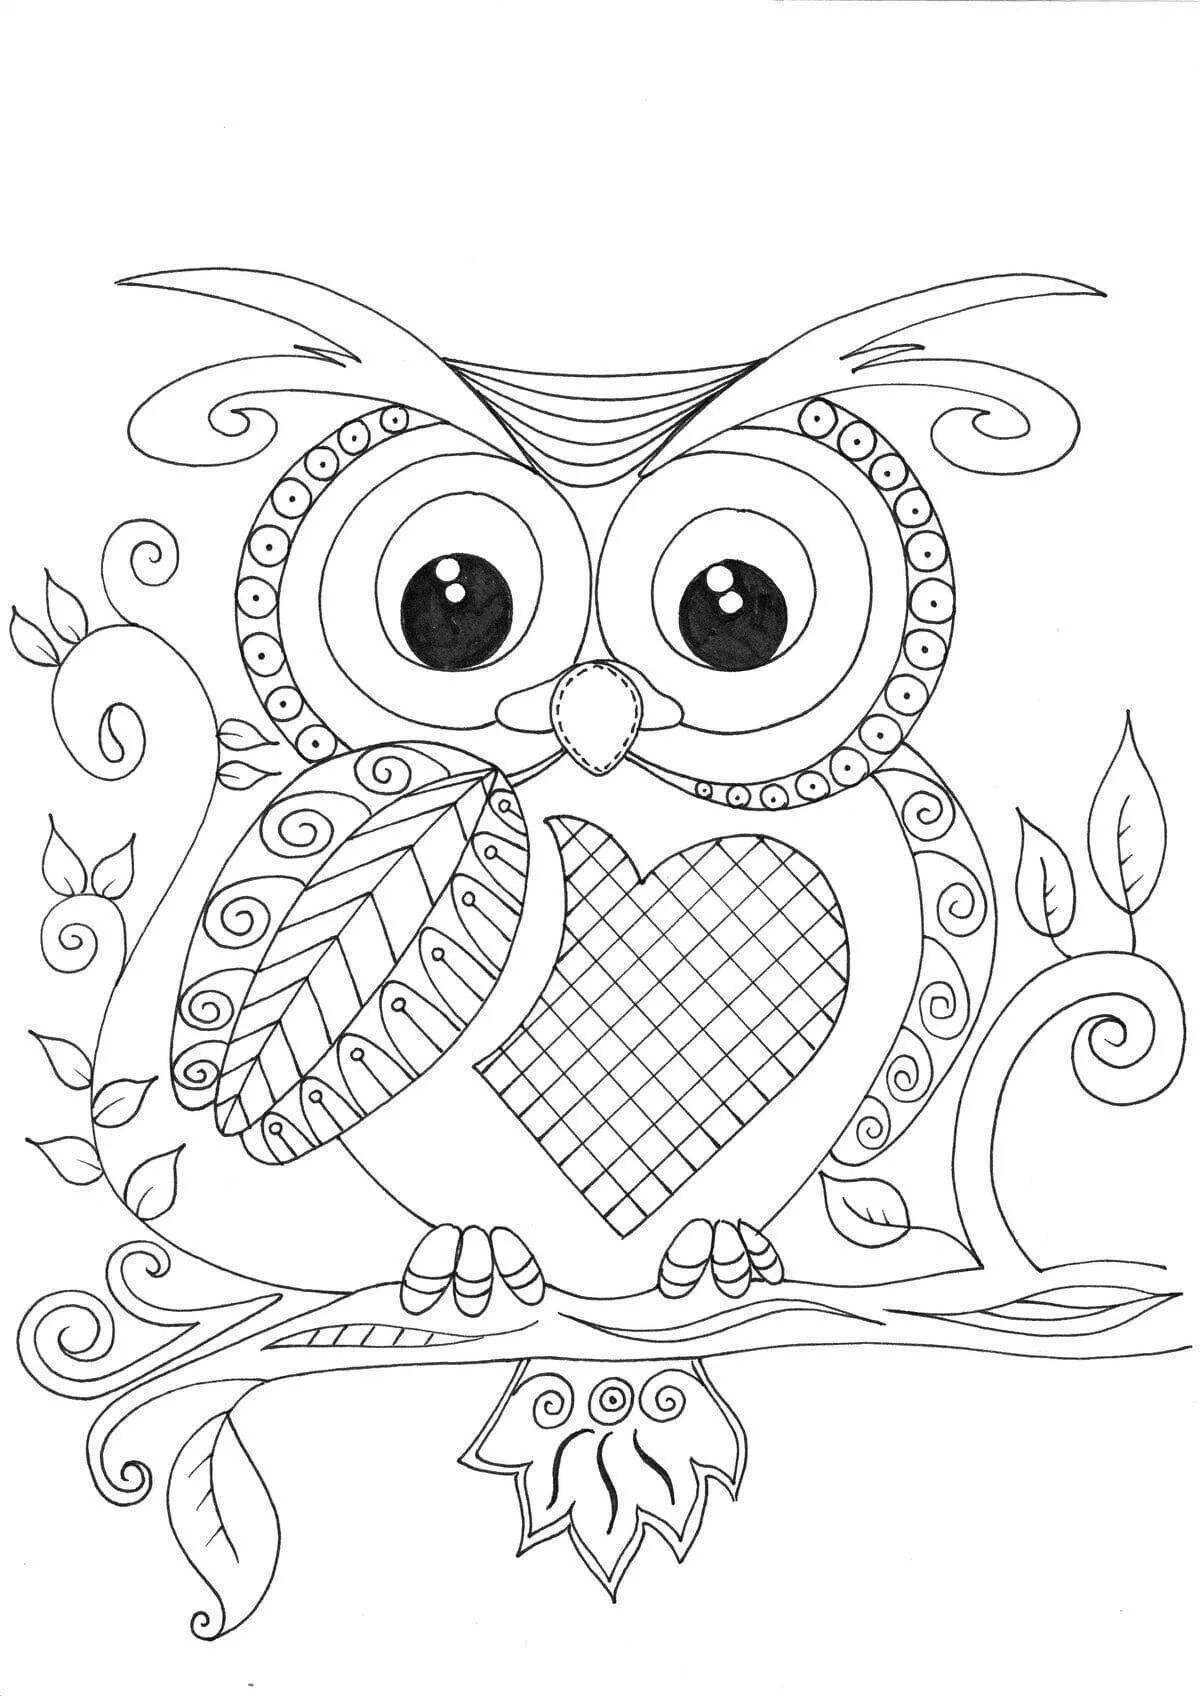 Exciting owl coloring book for kids